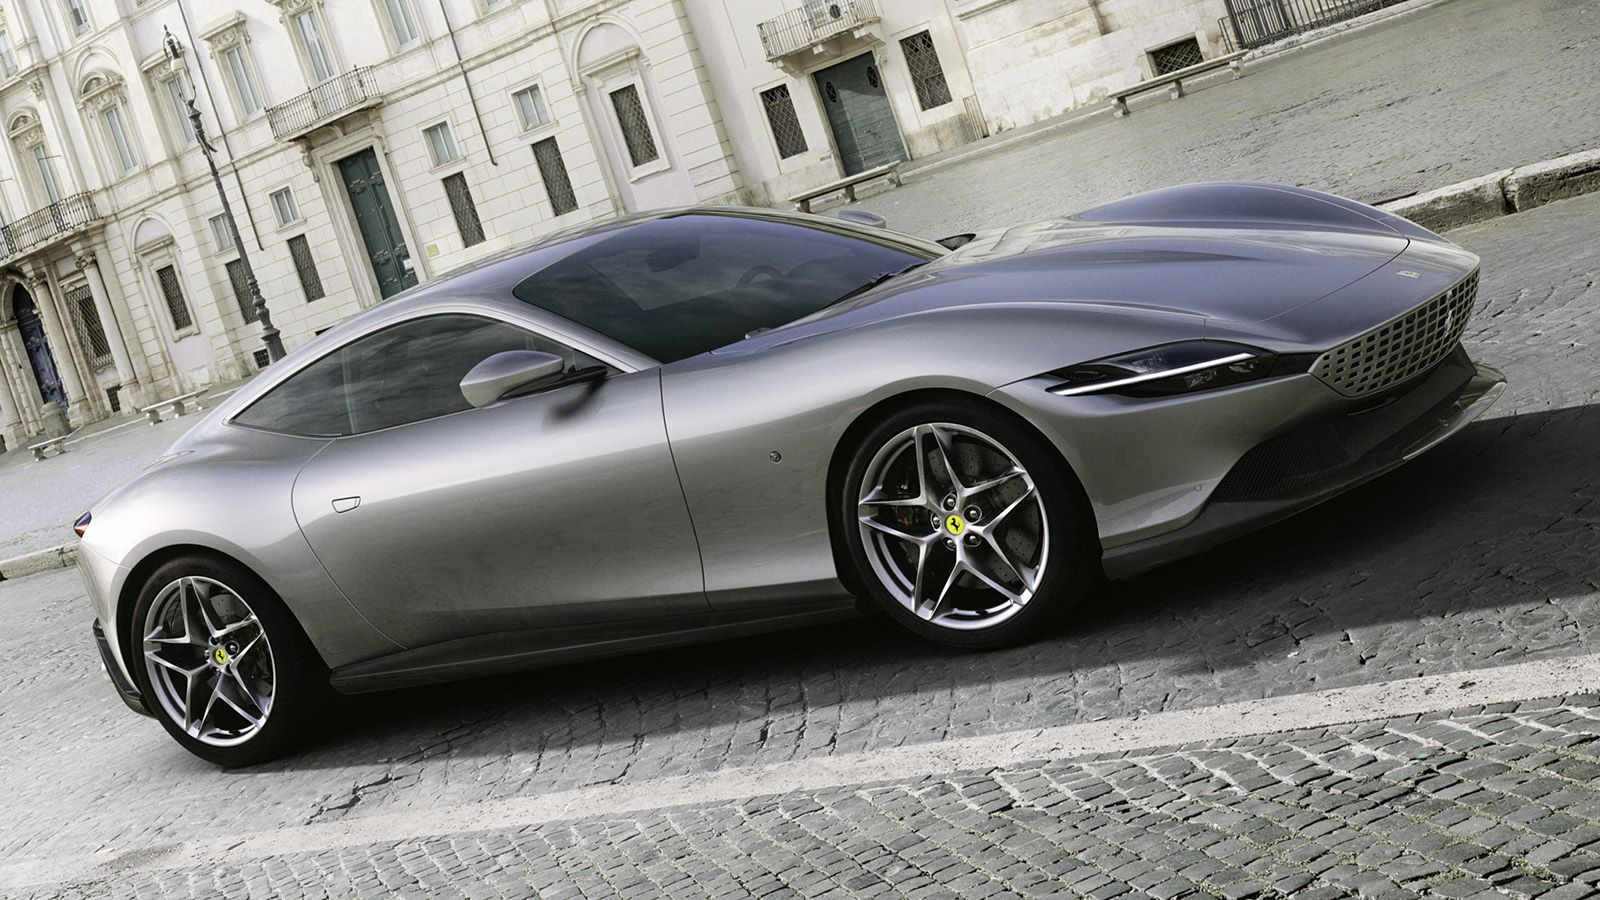 The New Ferrari Roma Is A Swoopy And Classy Road Trip Supercar